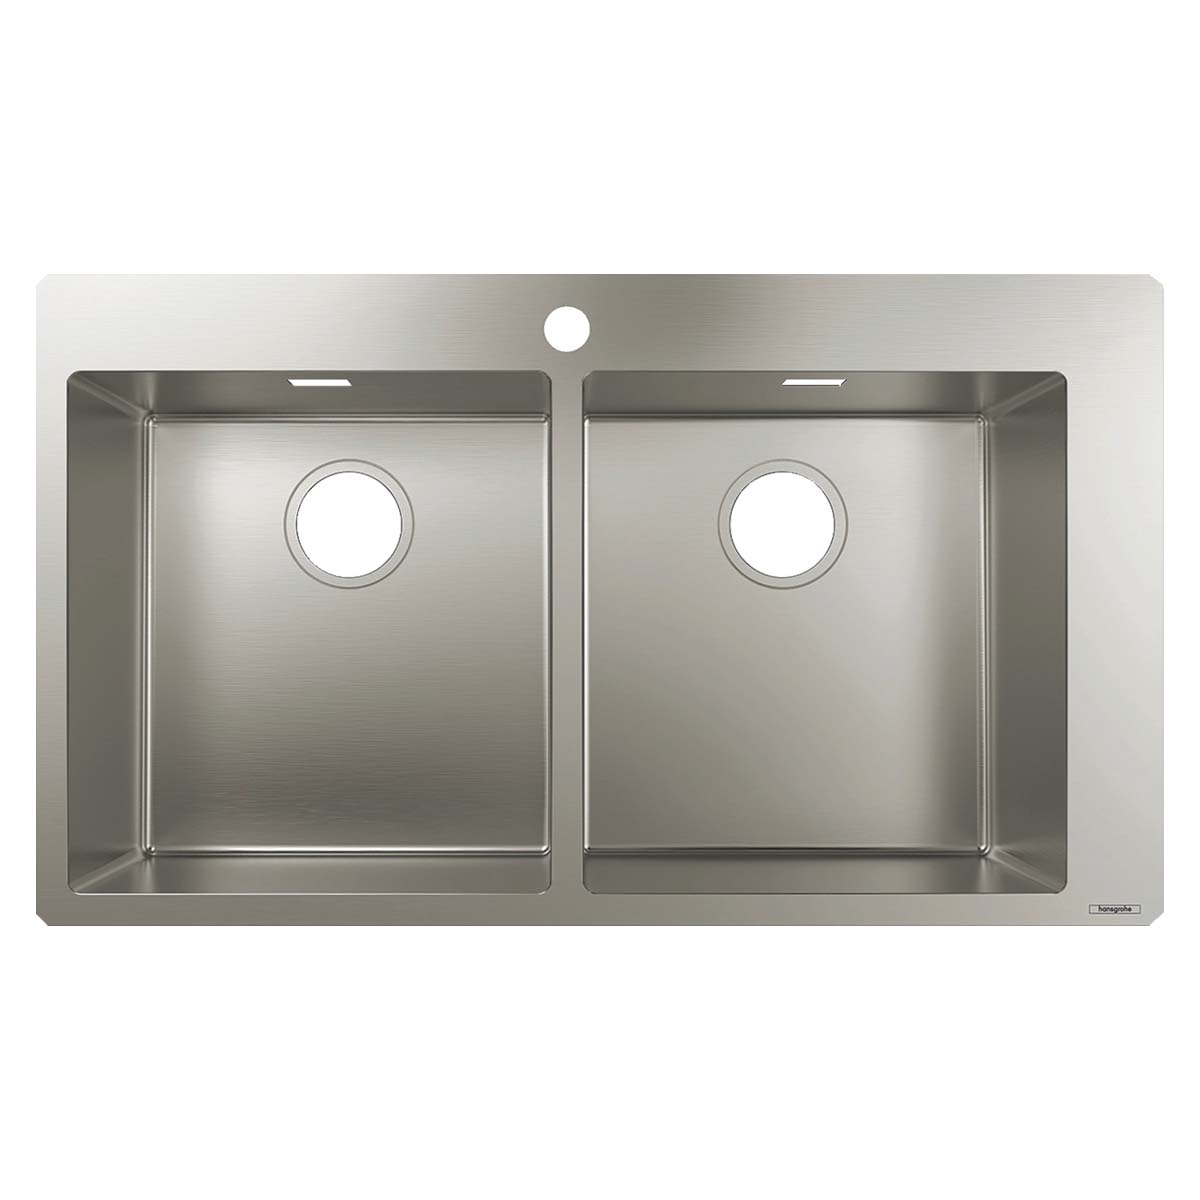 Hansgrohe S71 S711 F765 top mounted double bowl kitchen sink 865x500mm